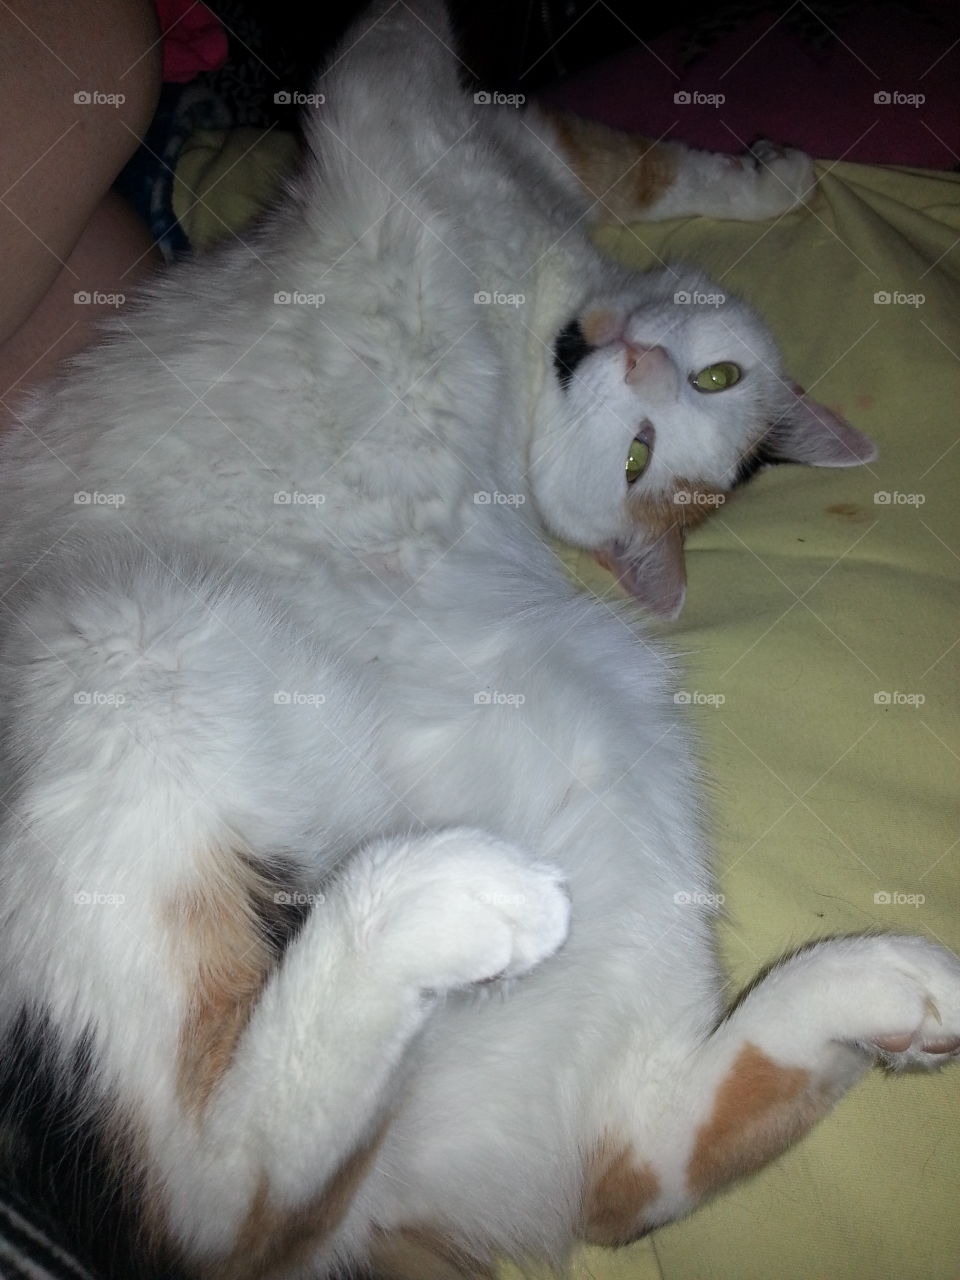 silly kitty. my cat Sprinkles waiting for a tummy rub